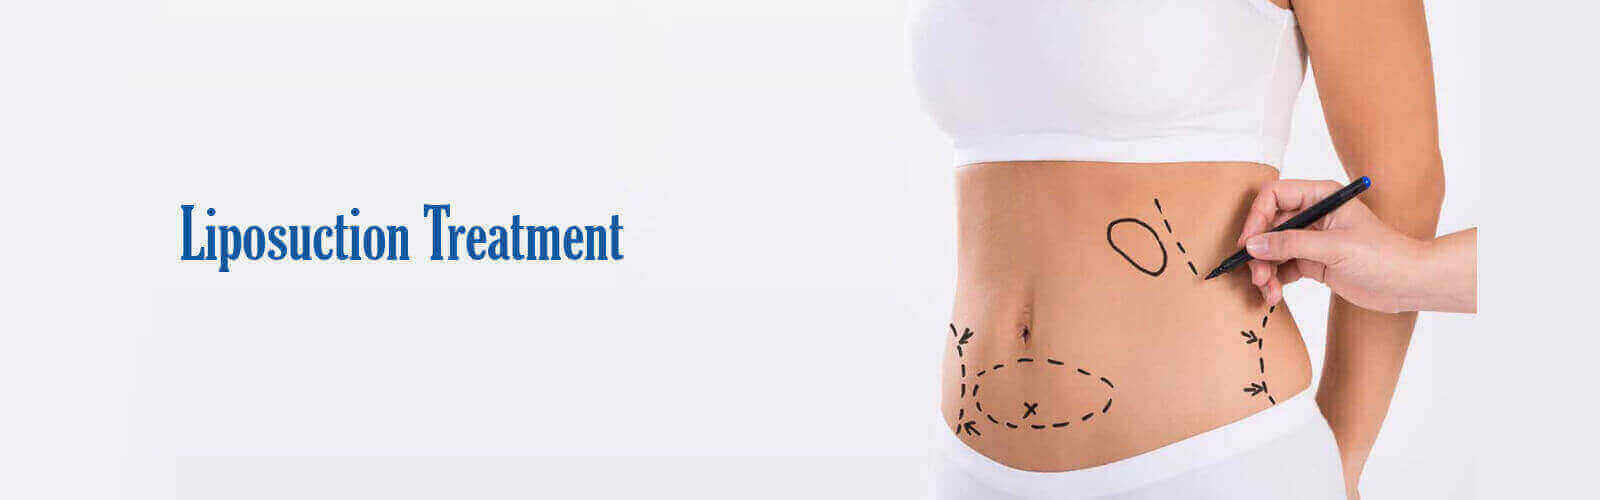 Liposuction Treatment in India